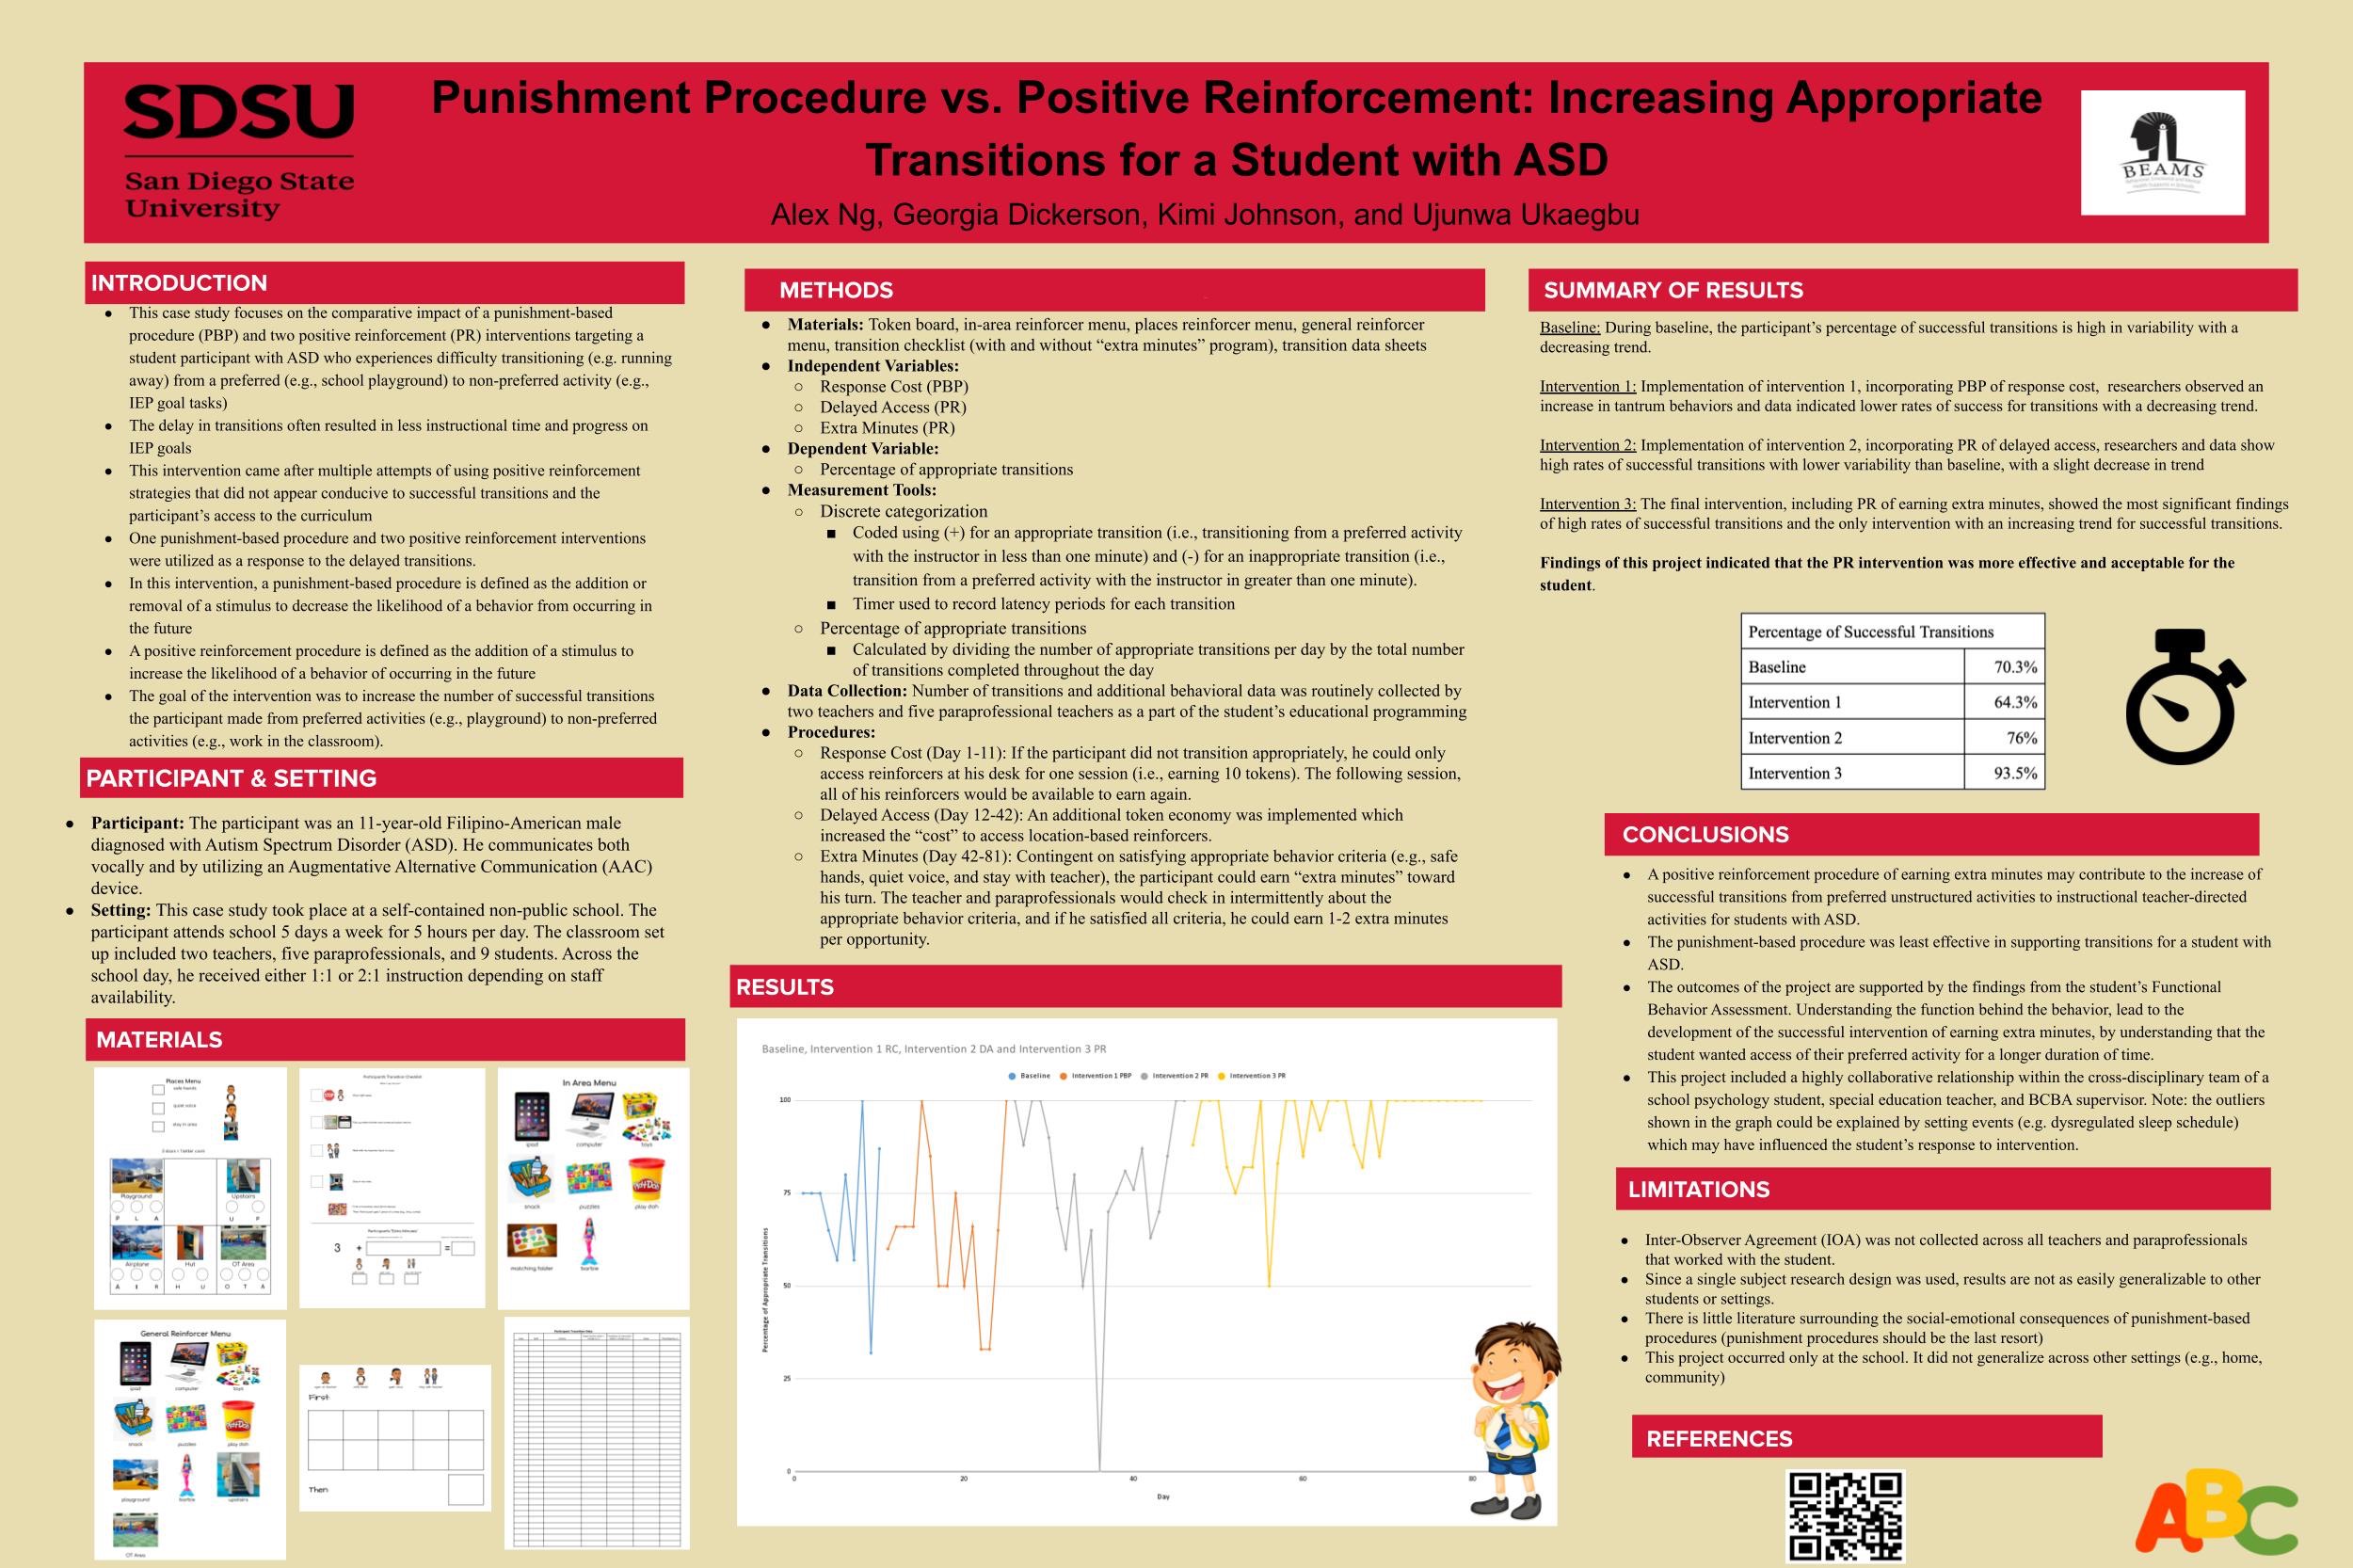 Punishment Procedure vs. Positive Reinforcement: Increasing Appropriate Transitions for a Student with ASD